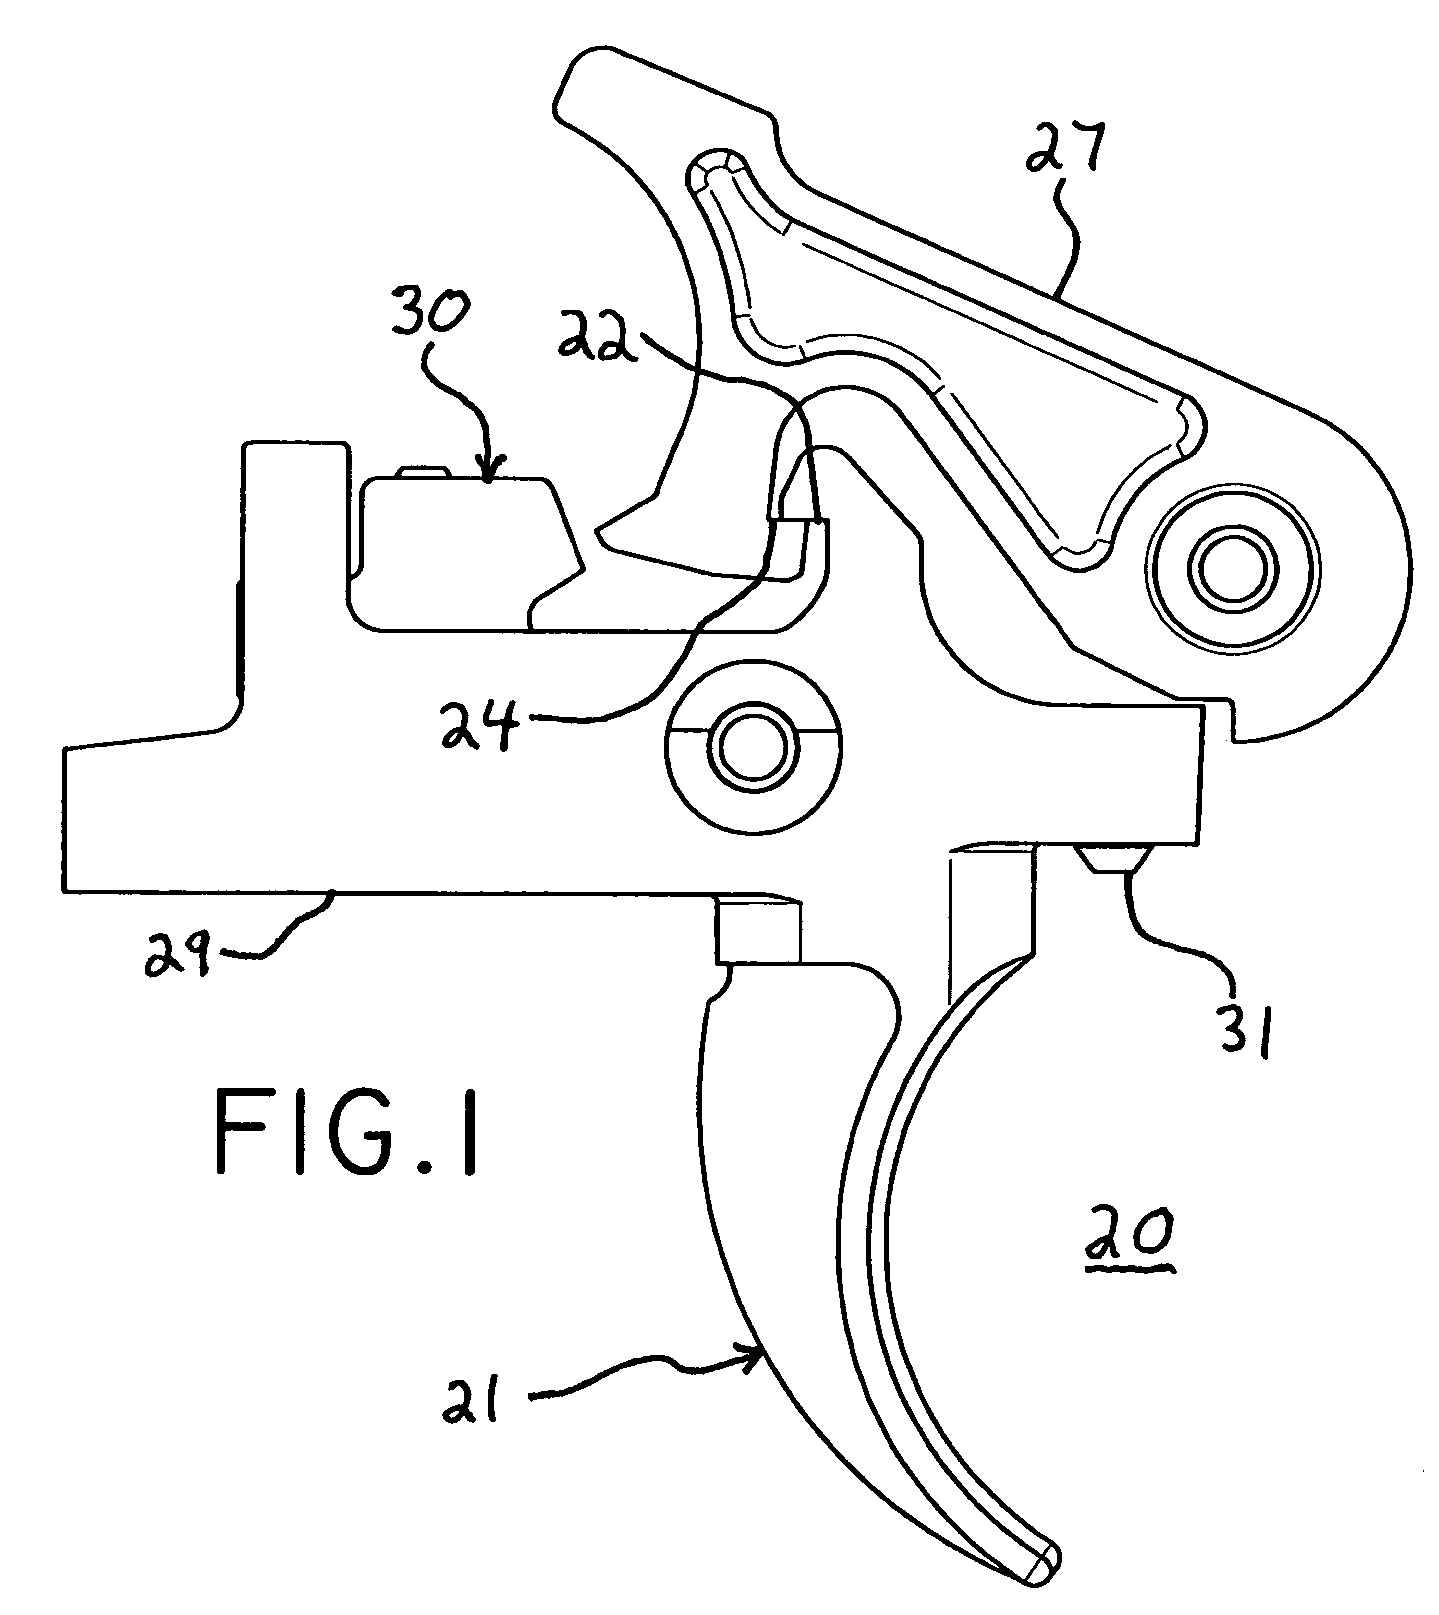 Adjustable dual stage trigger mechanism for semi-automatic weapons